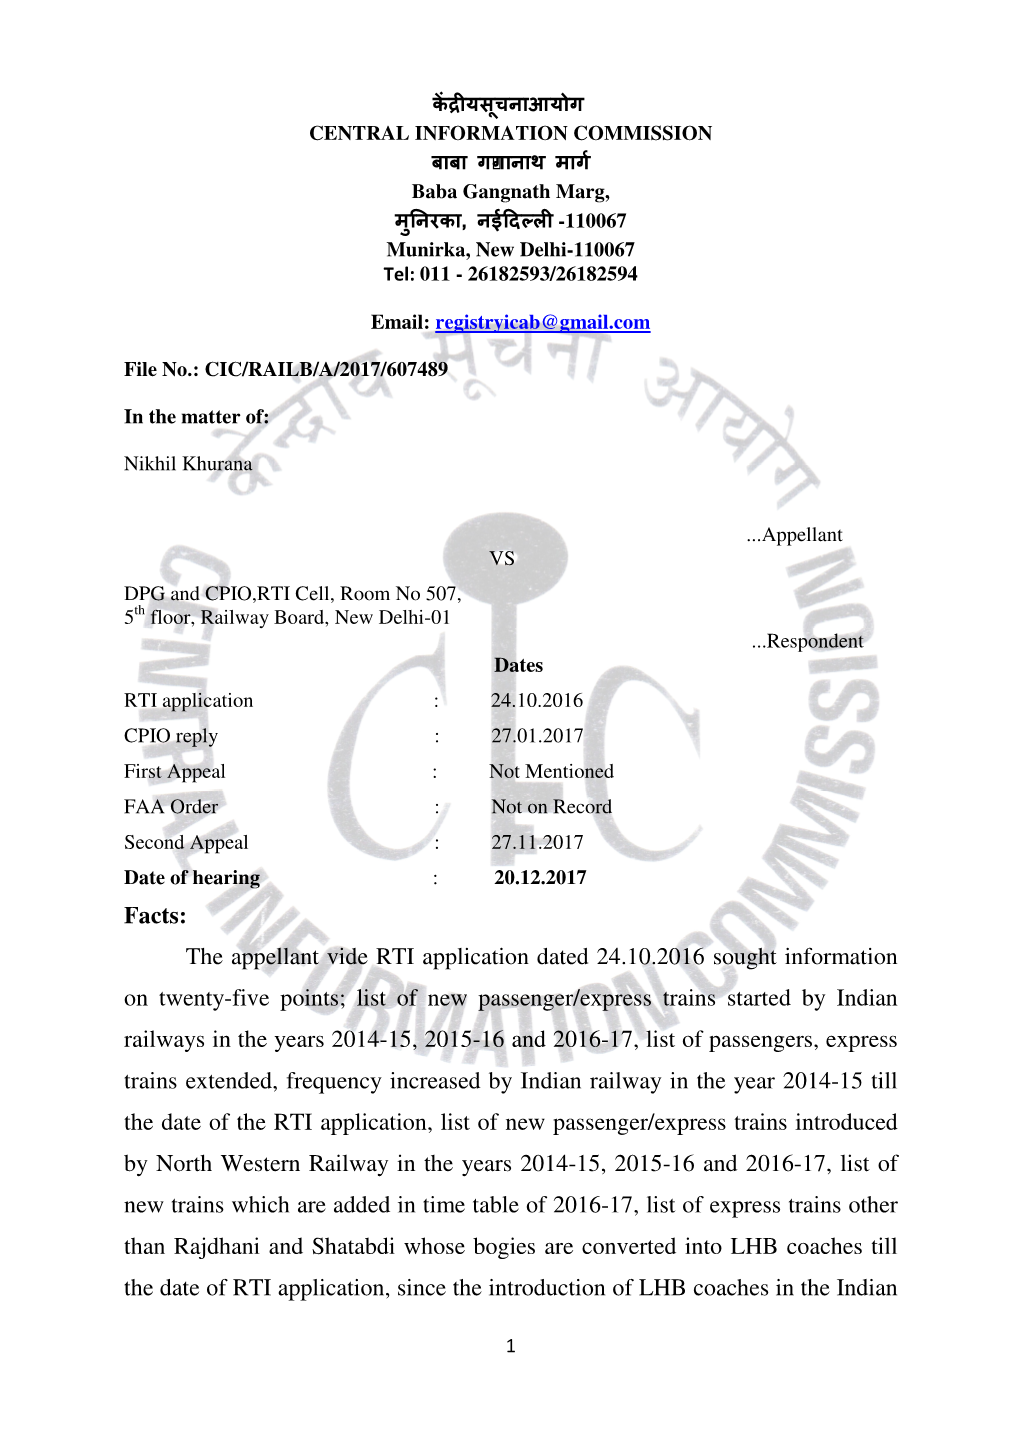 The Appellant Vide RTI Application Dated 24.10.2016 Sought